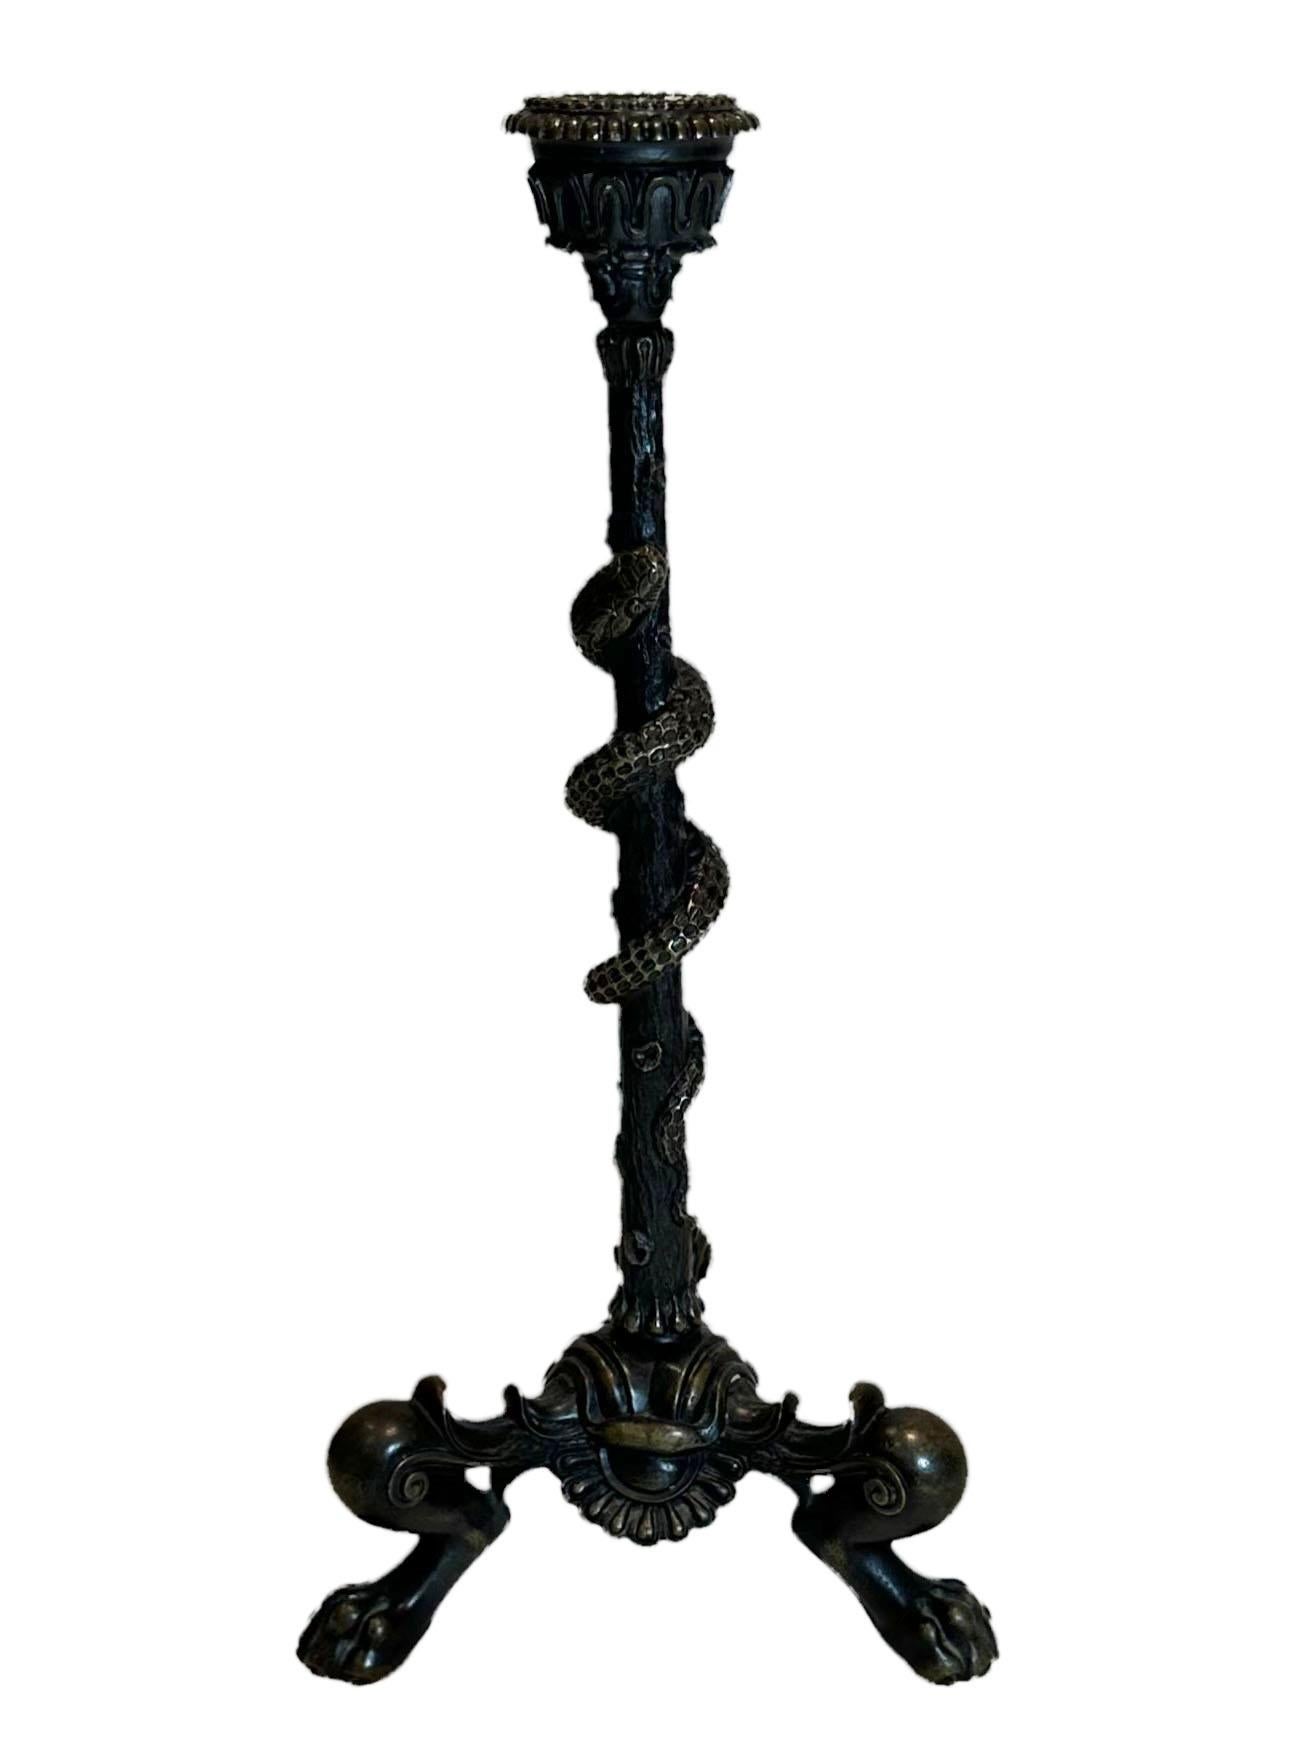 A single 19th century solid bronze grand tour candleholder with a tripod bottom. French and it is very high-quality with a dark patina.